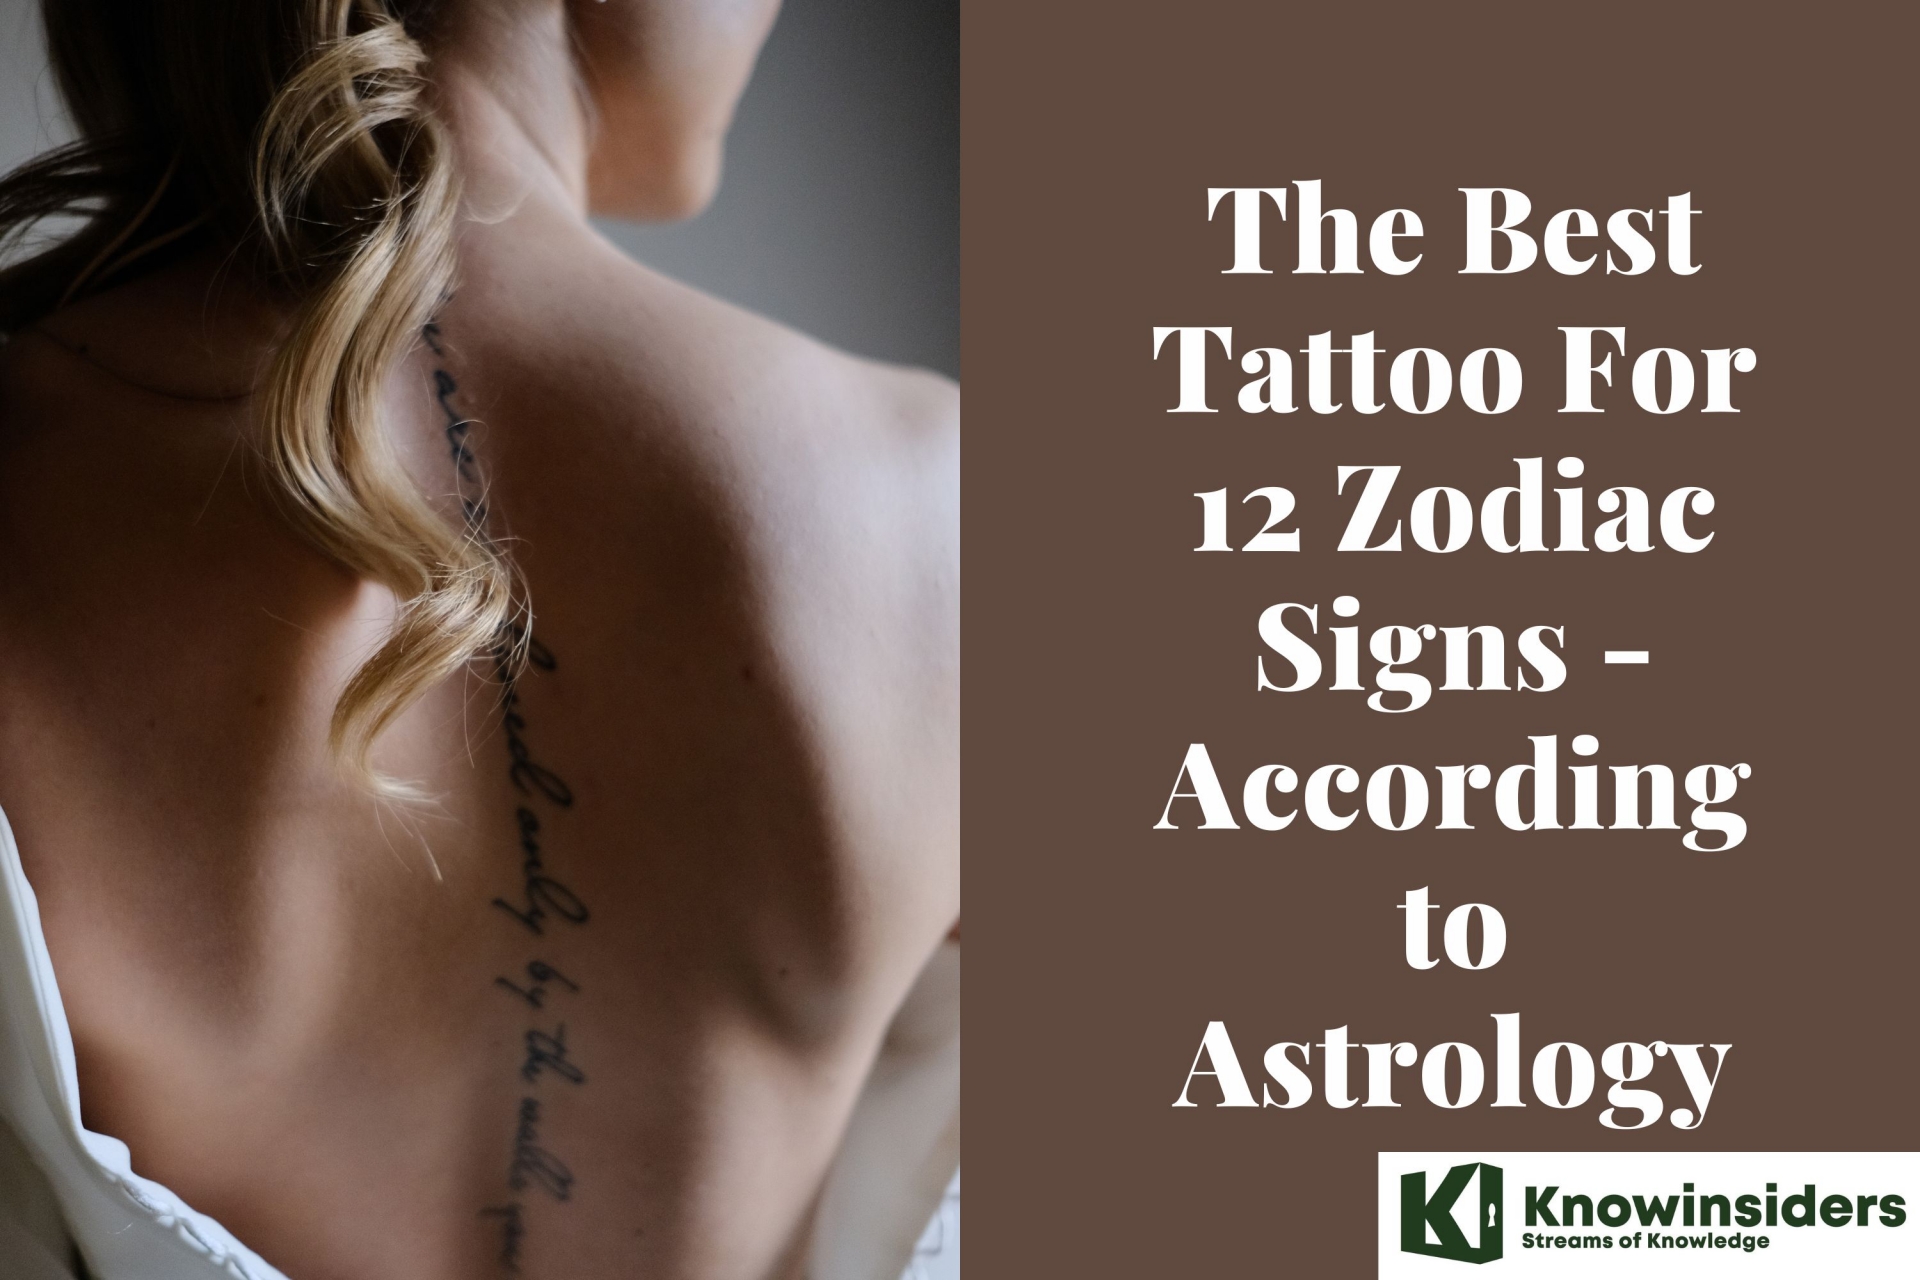 The Best Tattoo For 12 Zodiac Signs - According to Astrology